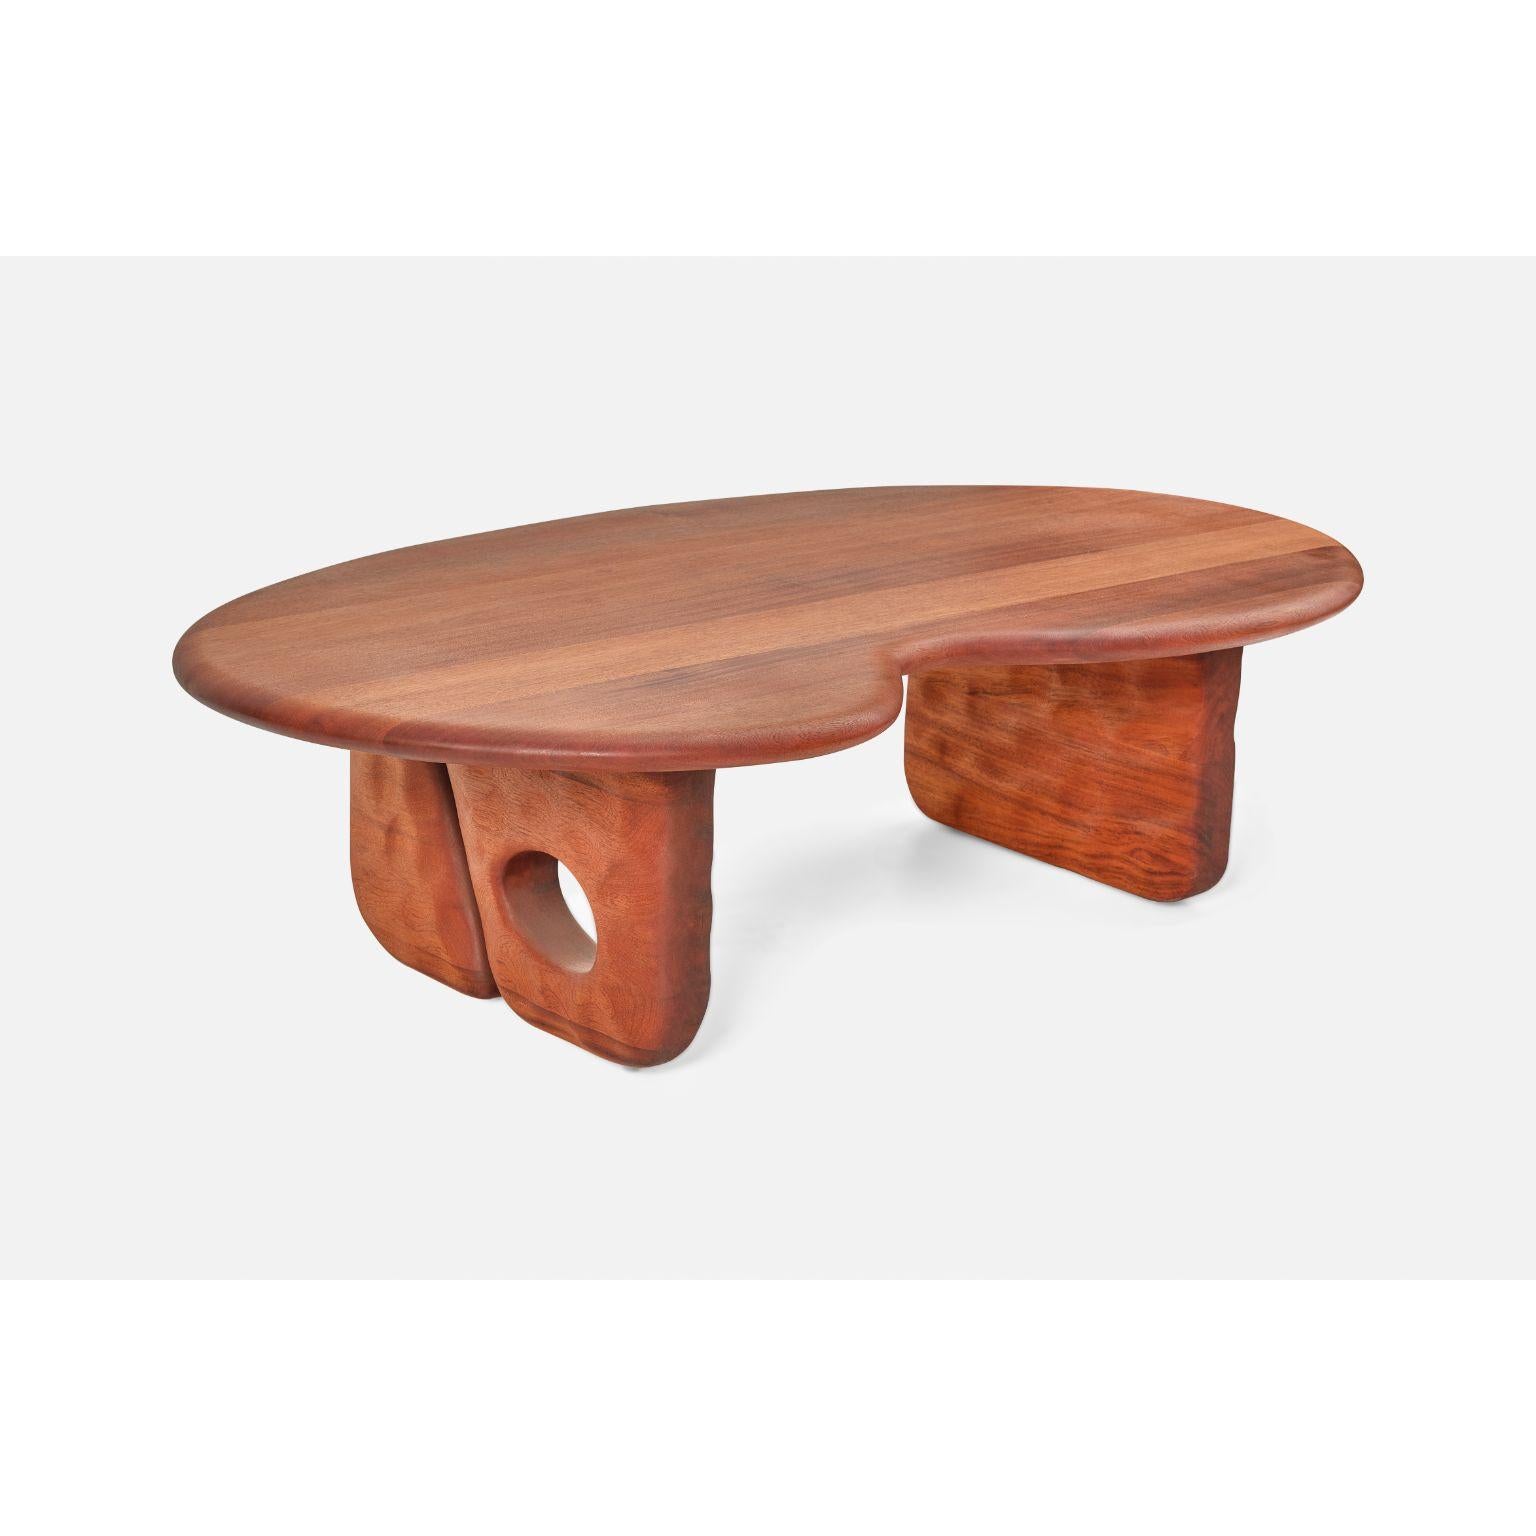 Avasin Low Table by Contemporary Ecowood (Postmoderne) im Angebot